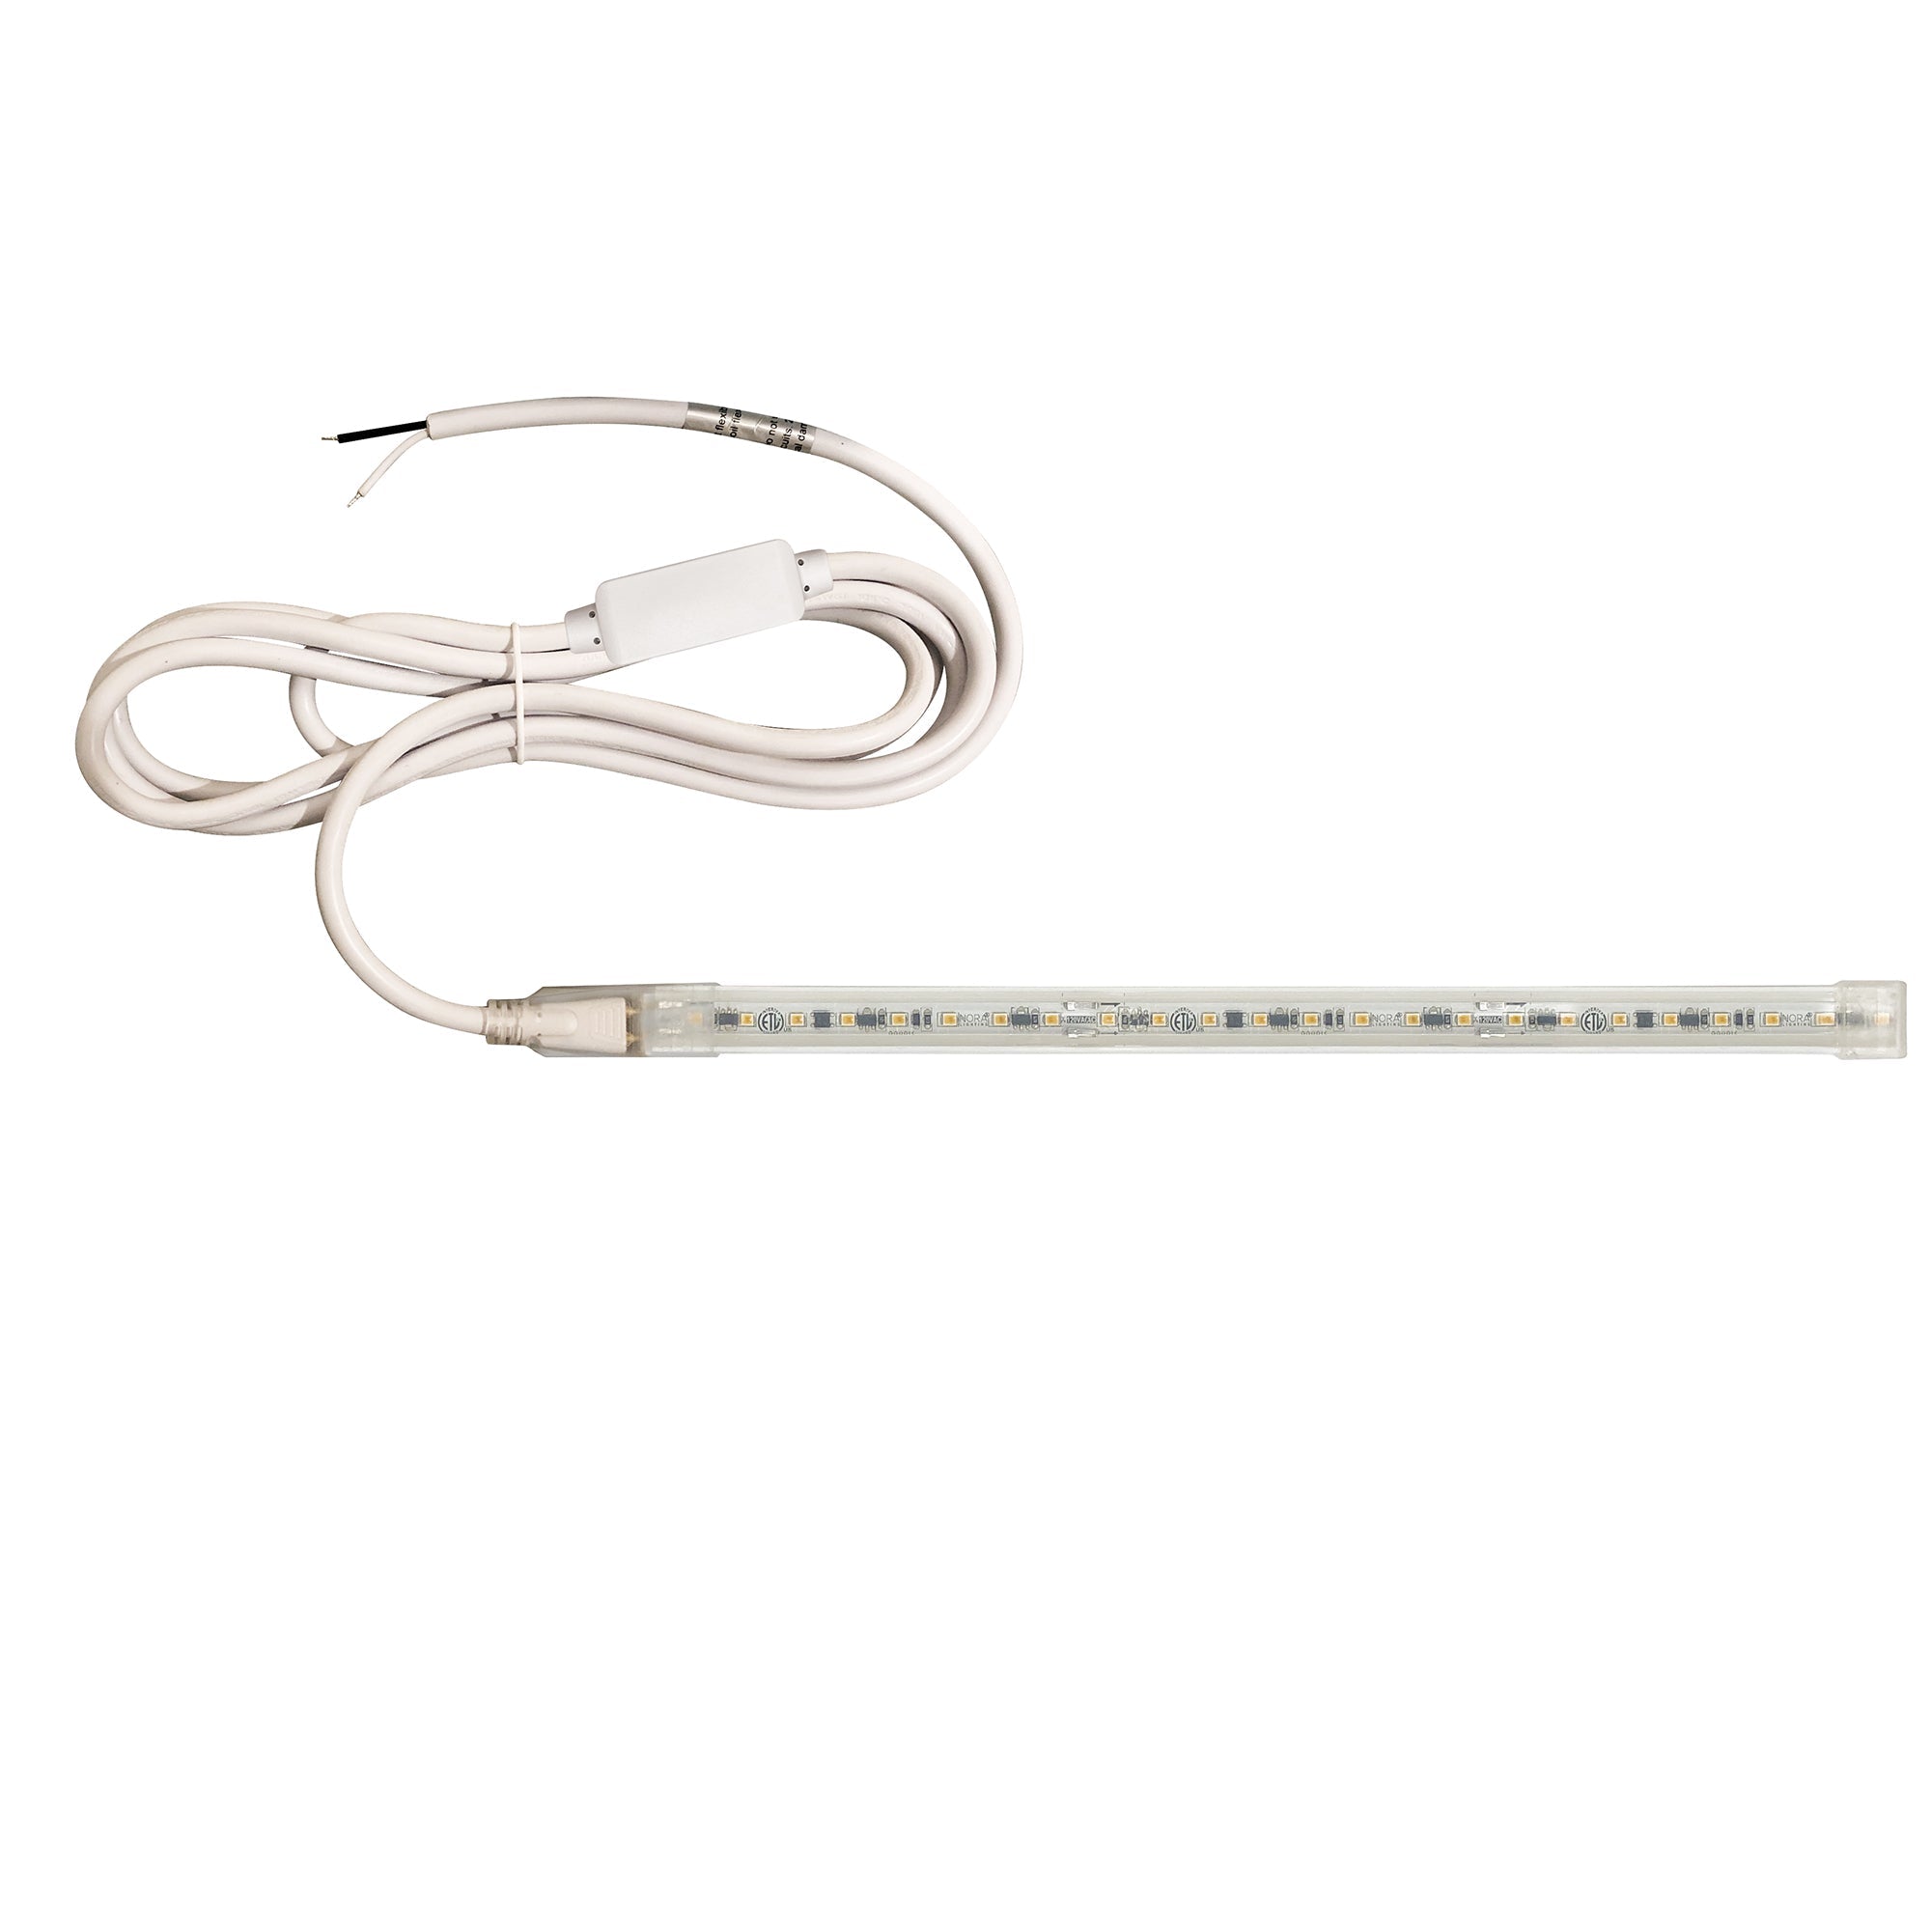 Nora Lighting NUTP13-W8-12-930/HWSP - Accent / Undercabinet - Custom Cut 8-ft 120V Continuous LED Tape Light, 330lm / 3.6W per foot, 3000K, w/ Mounting Clips and 8' Hardwired Power Cord w/ Surge Protector